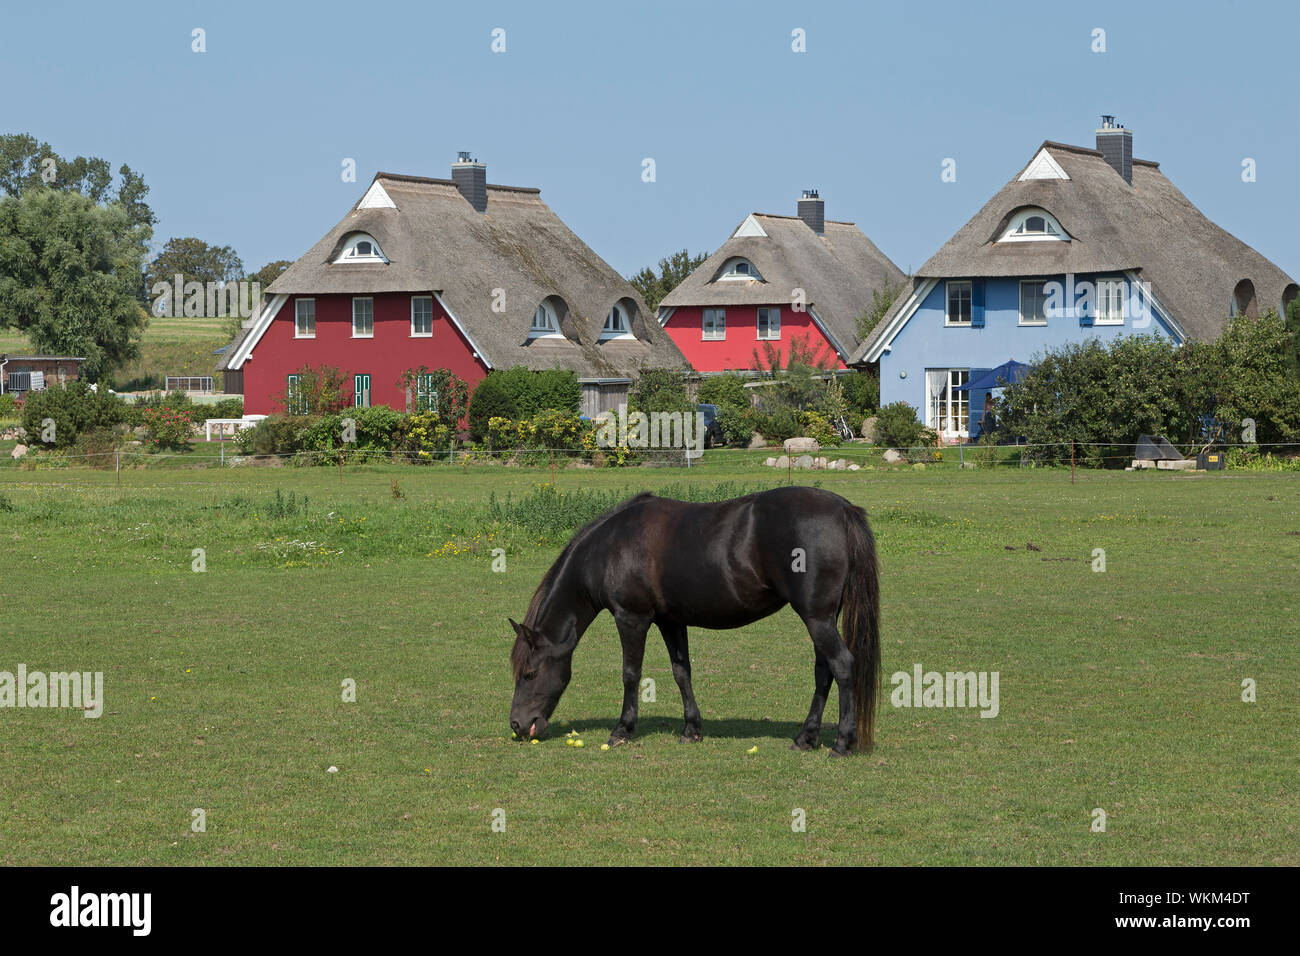 pony and thatched houses, Ahrenshoop, Mecklenburg-West Pomerania, Germany Stock Photo